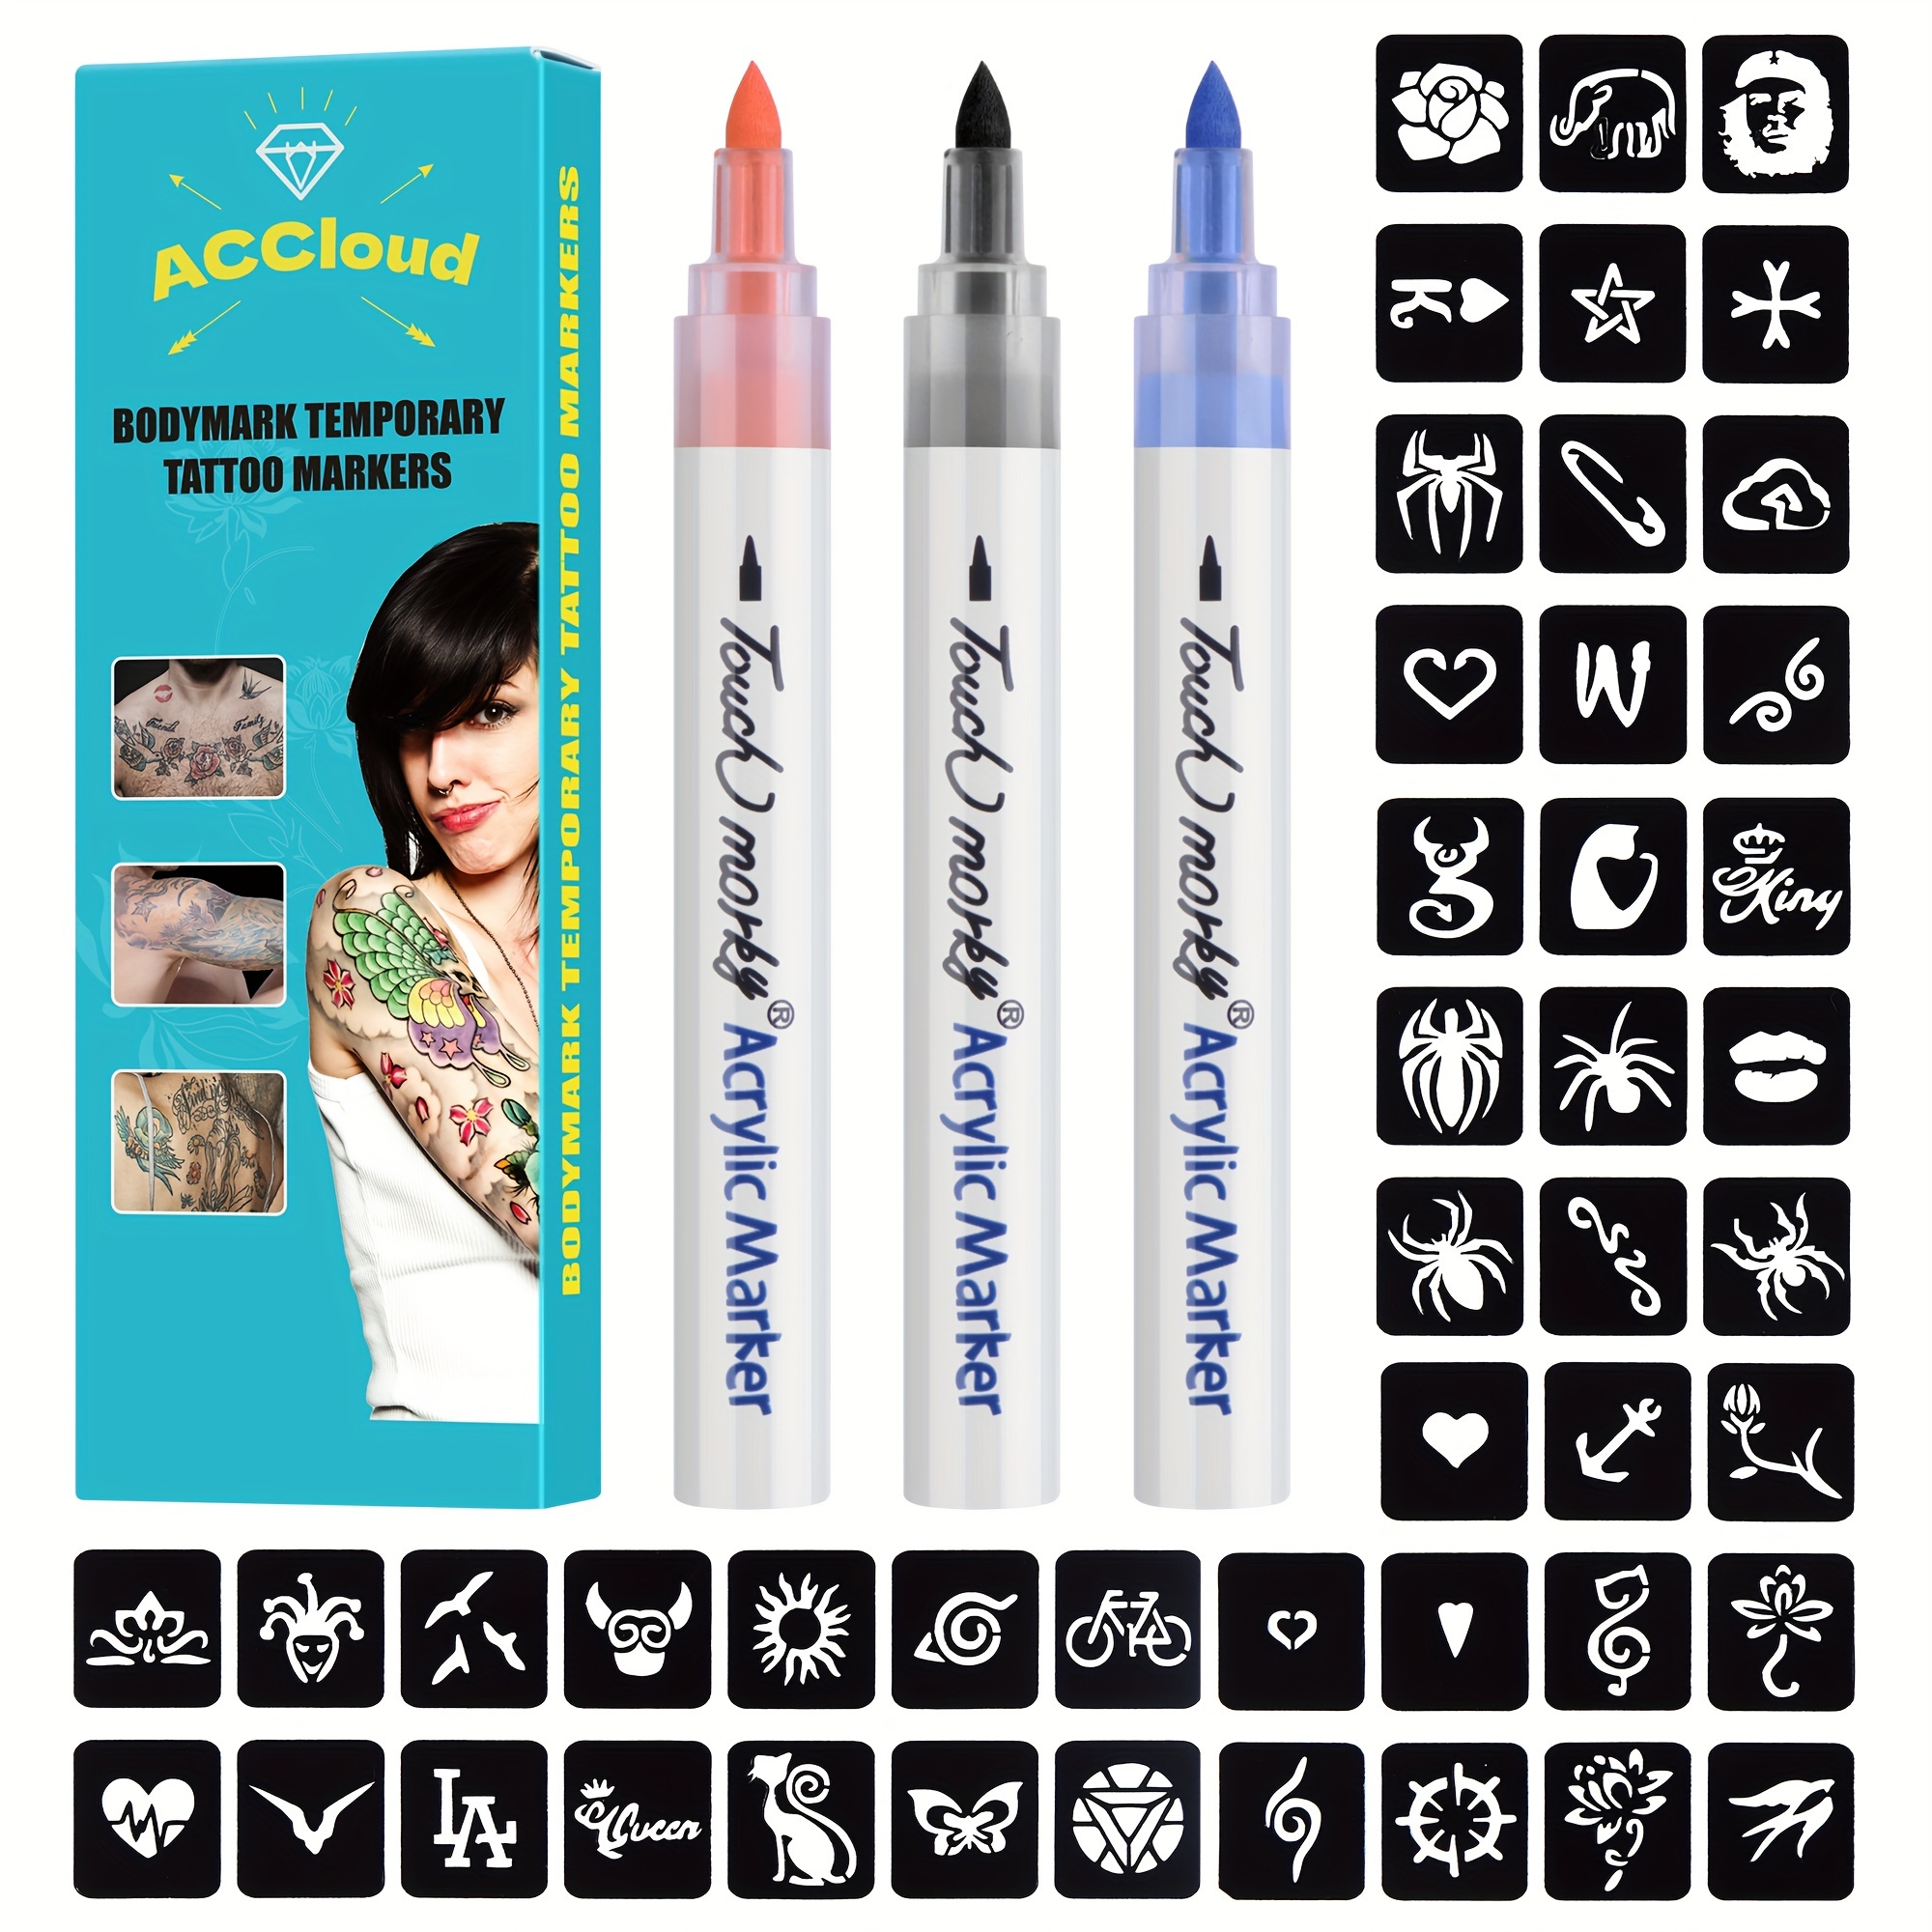 Temporary Tattoo Marker Body Marker Blue Tattoo Marker Skin Safe Cosmetic  Brush Tip Youth Tattoo Temporary Try Tattoo Wash off Costume Ink 